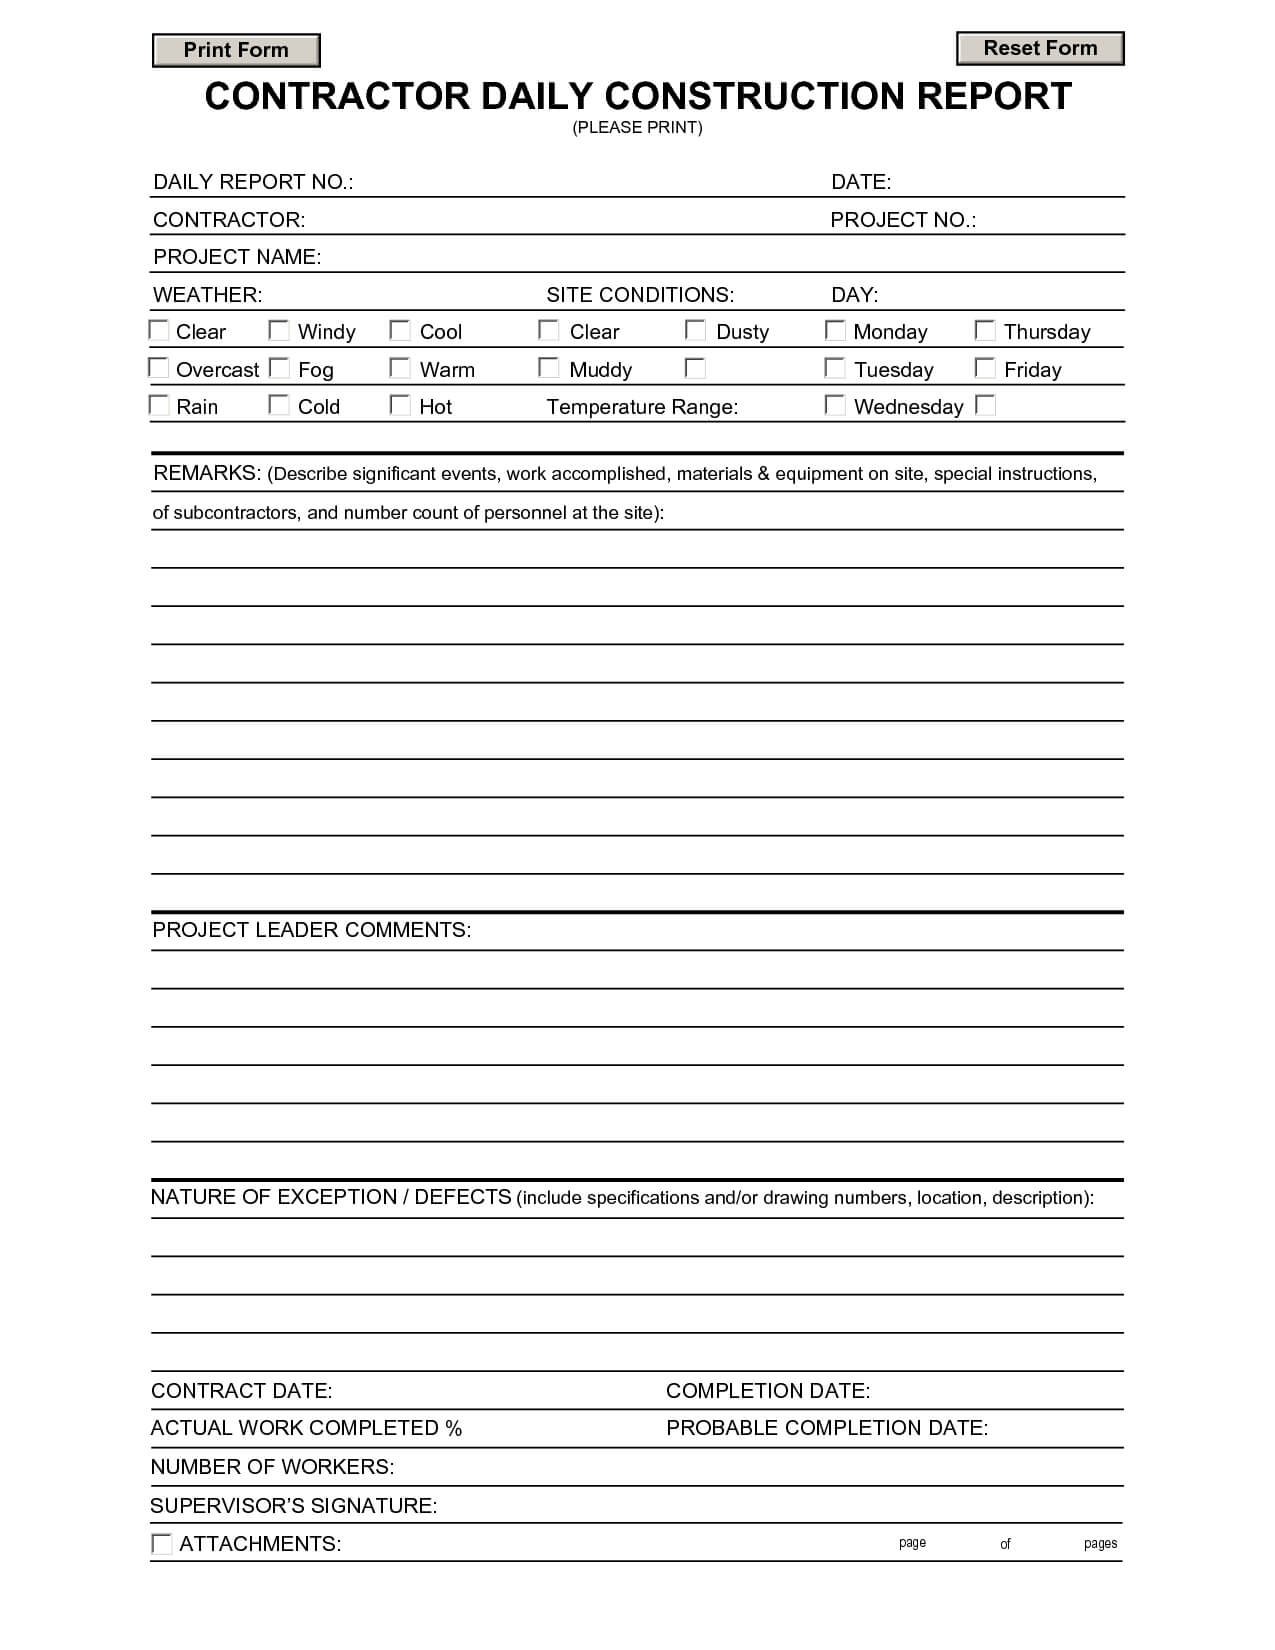 Construction Daily Report Template | Daily Progress, Report Inside Employee Daily Report Template